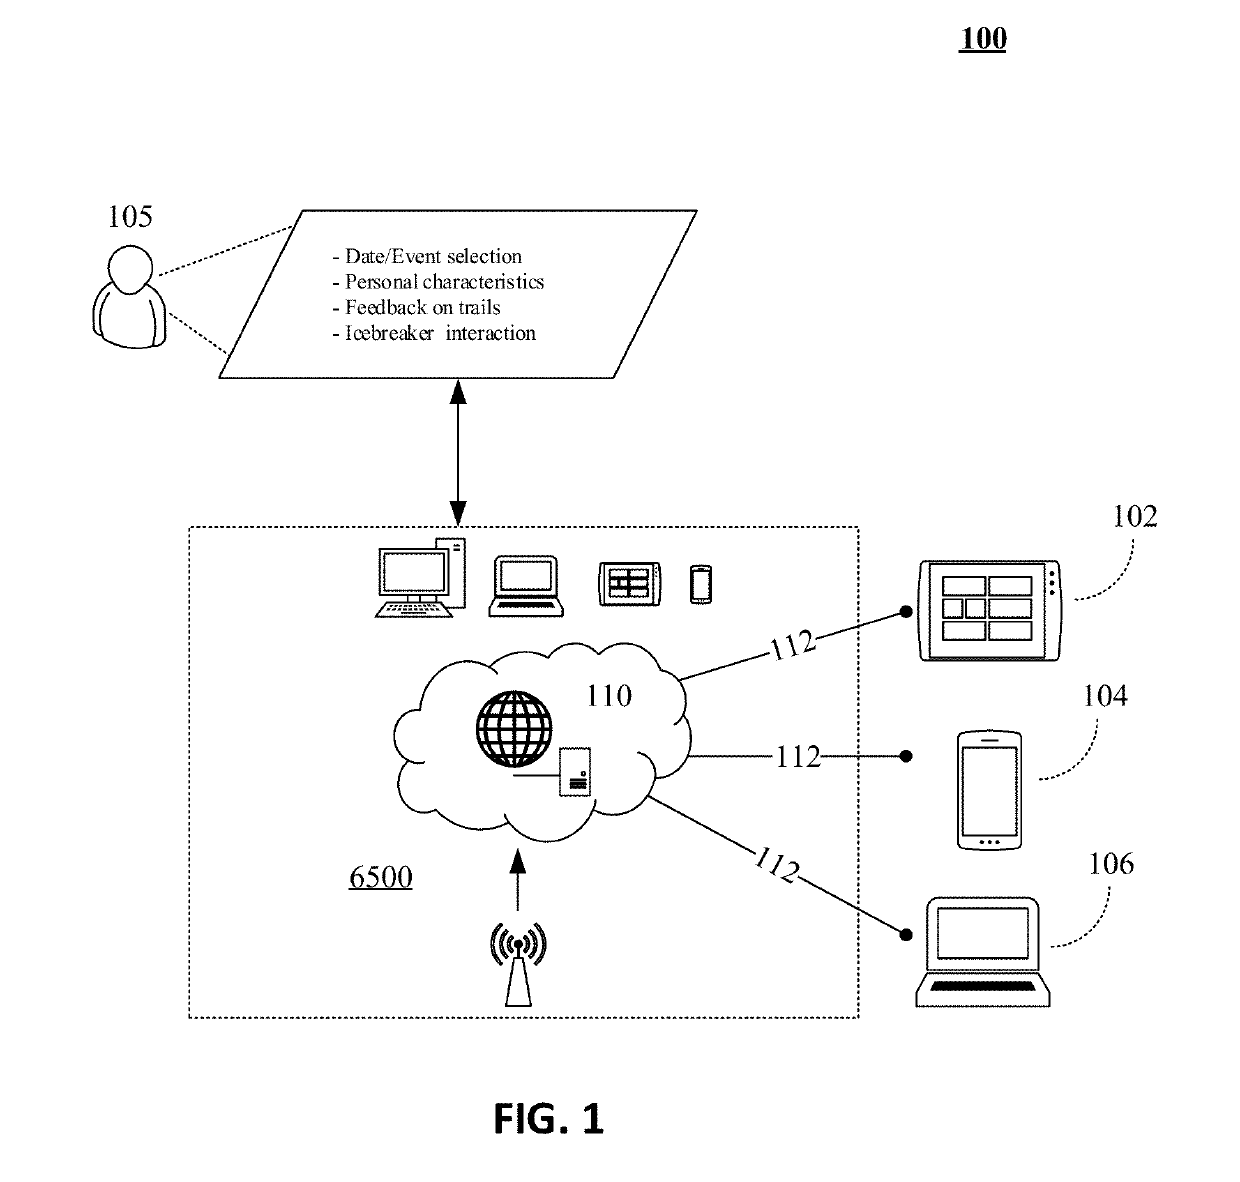 Method and system for facilitating provisioning of social networking data to a mobile device